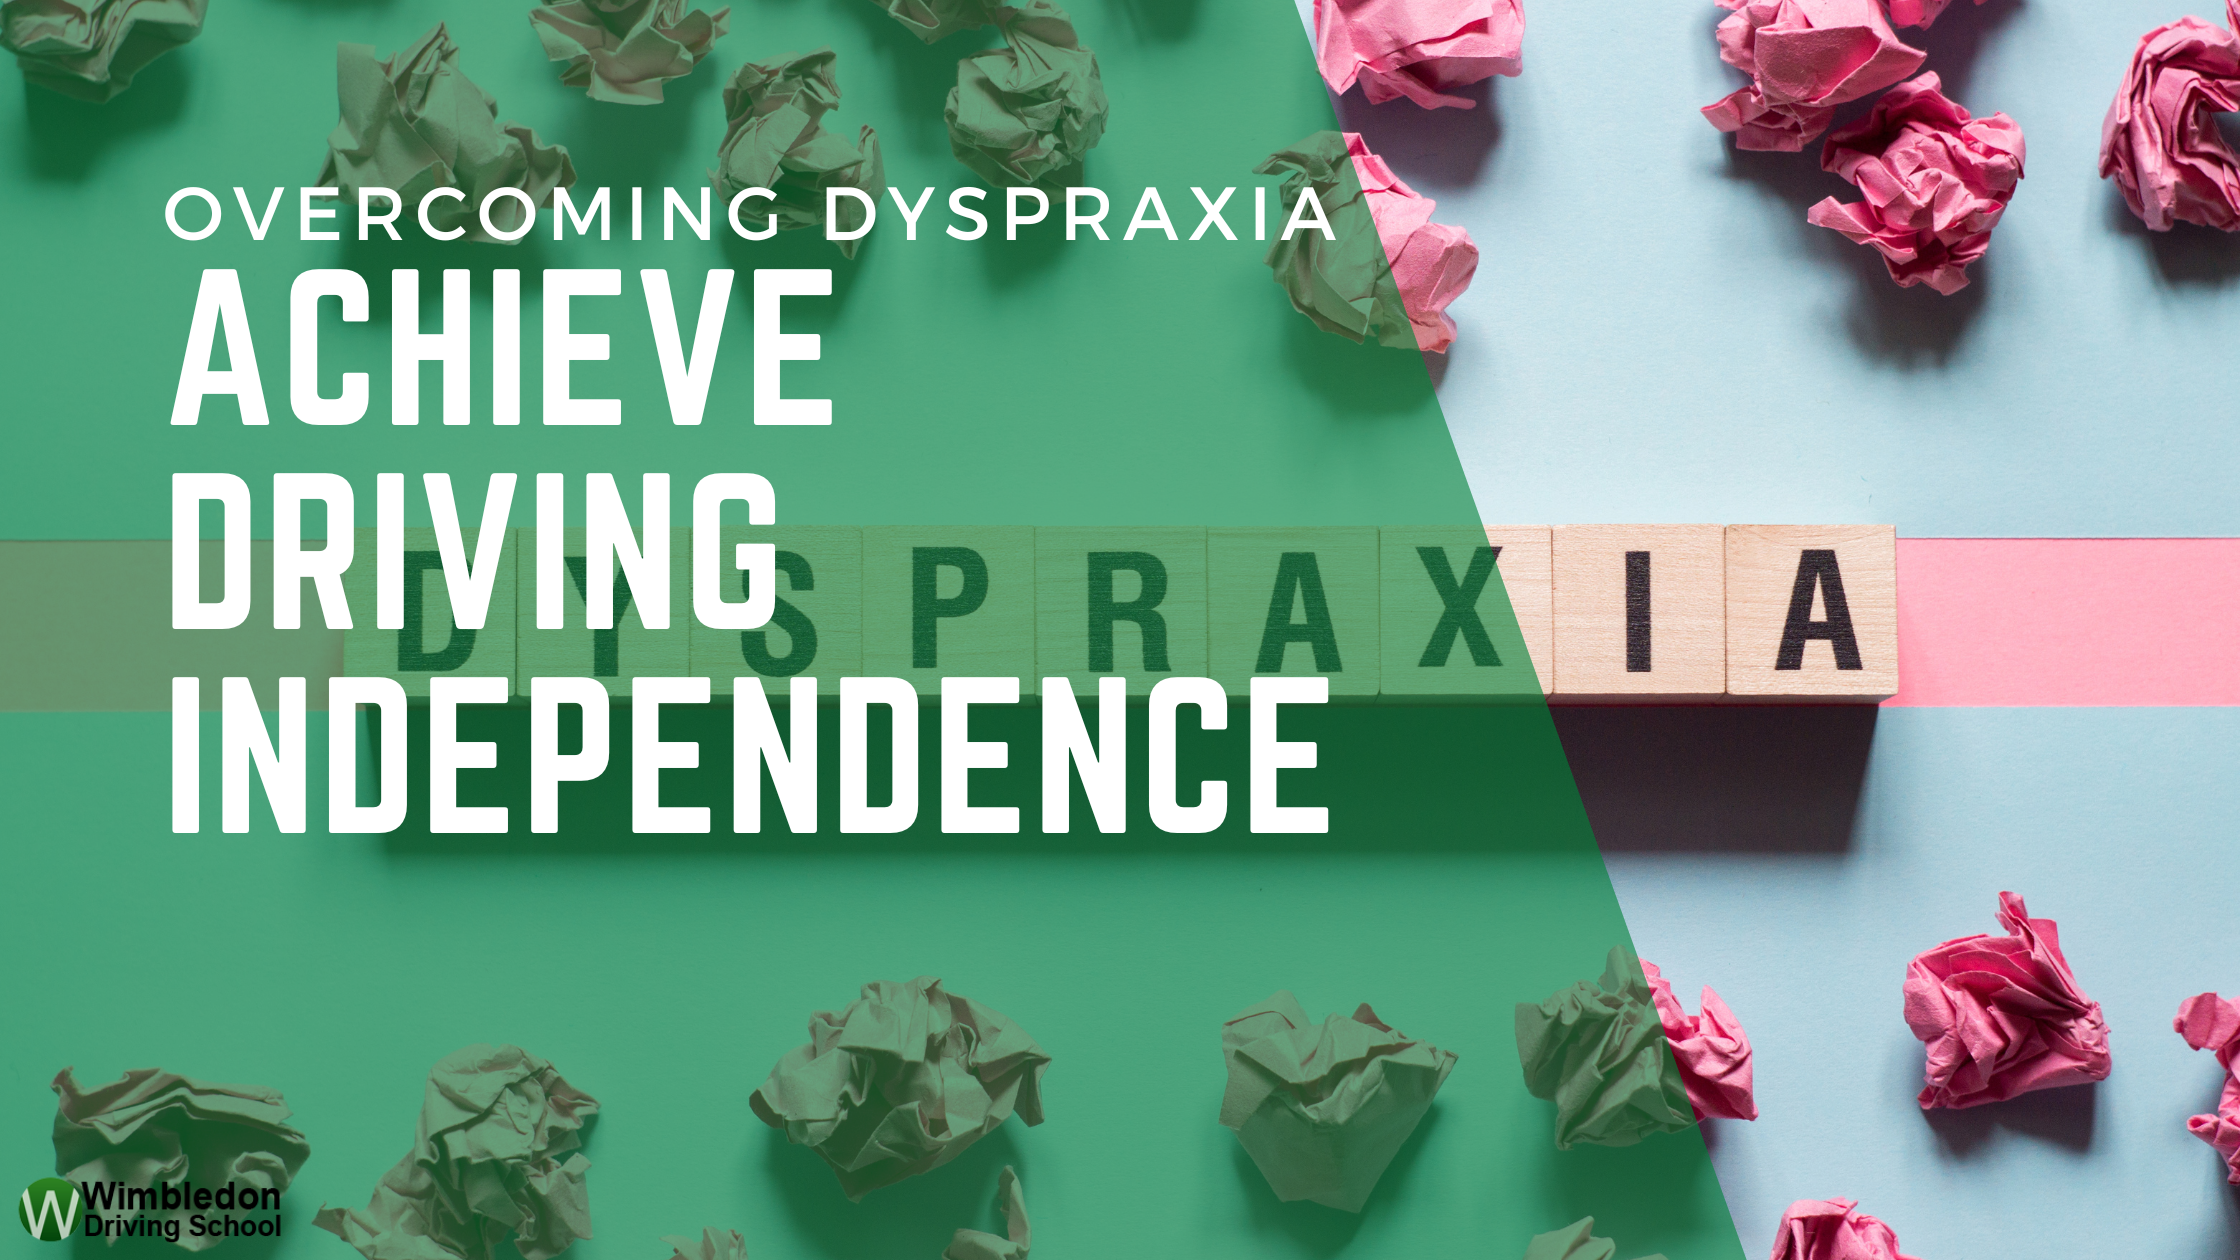 Overcoming Dyspraxia to Achieve Driving Independence